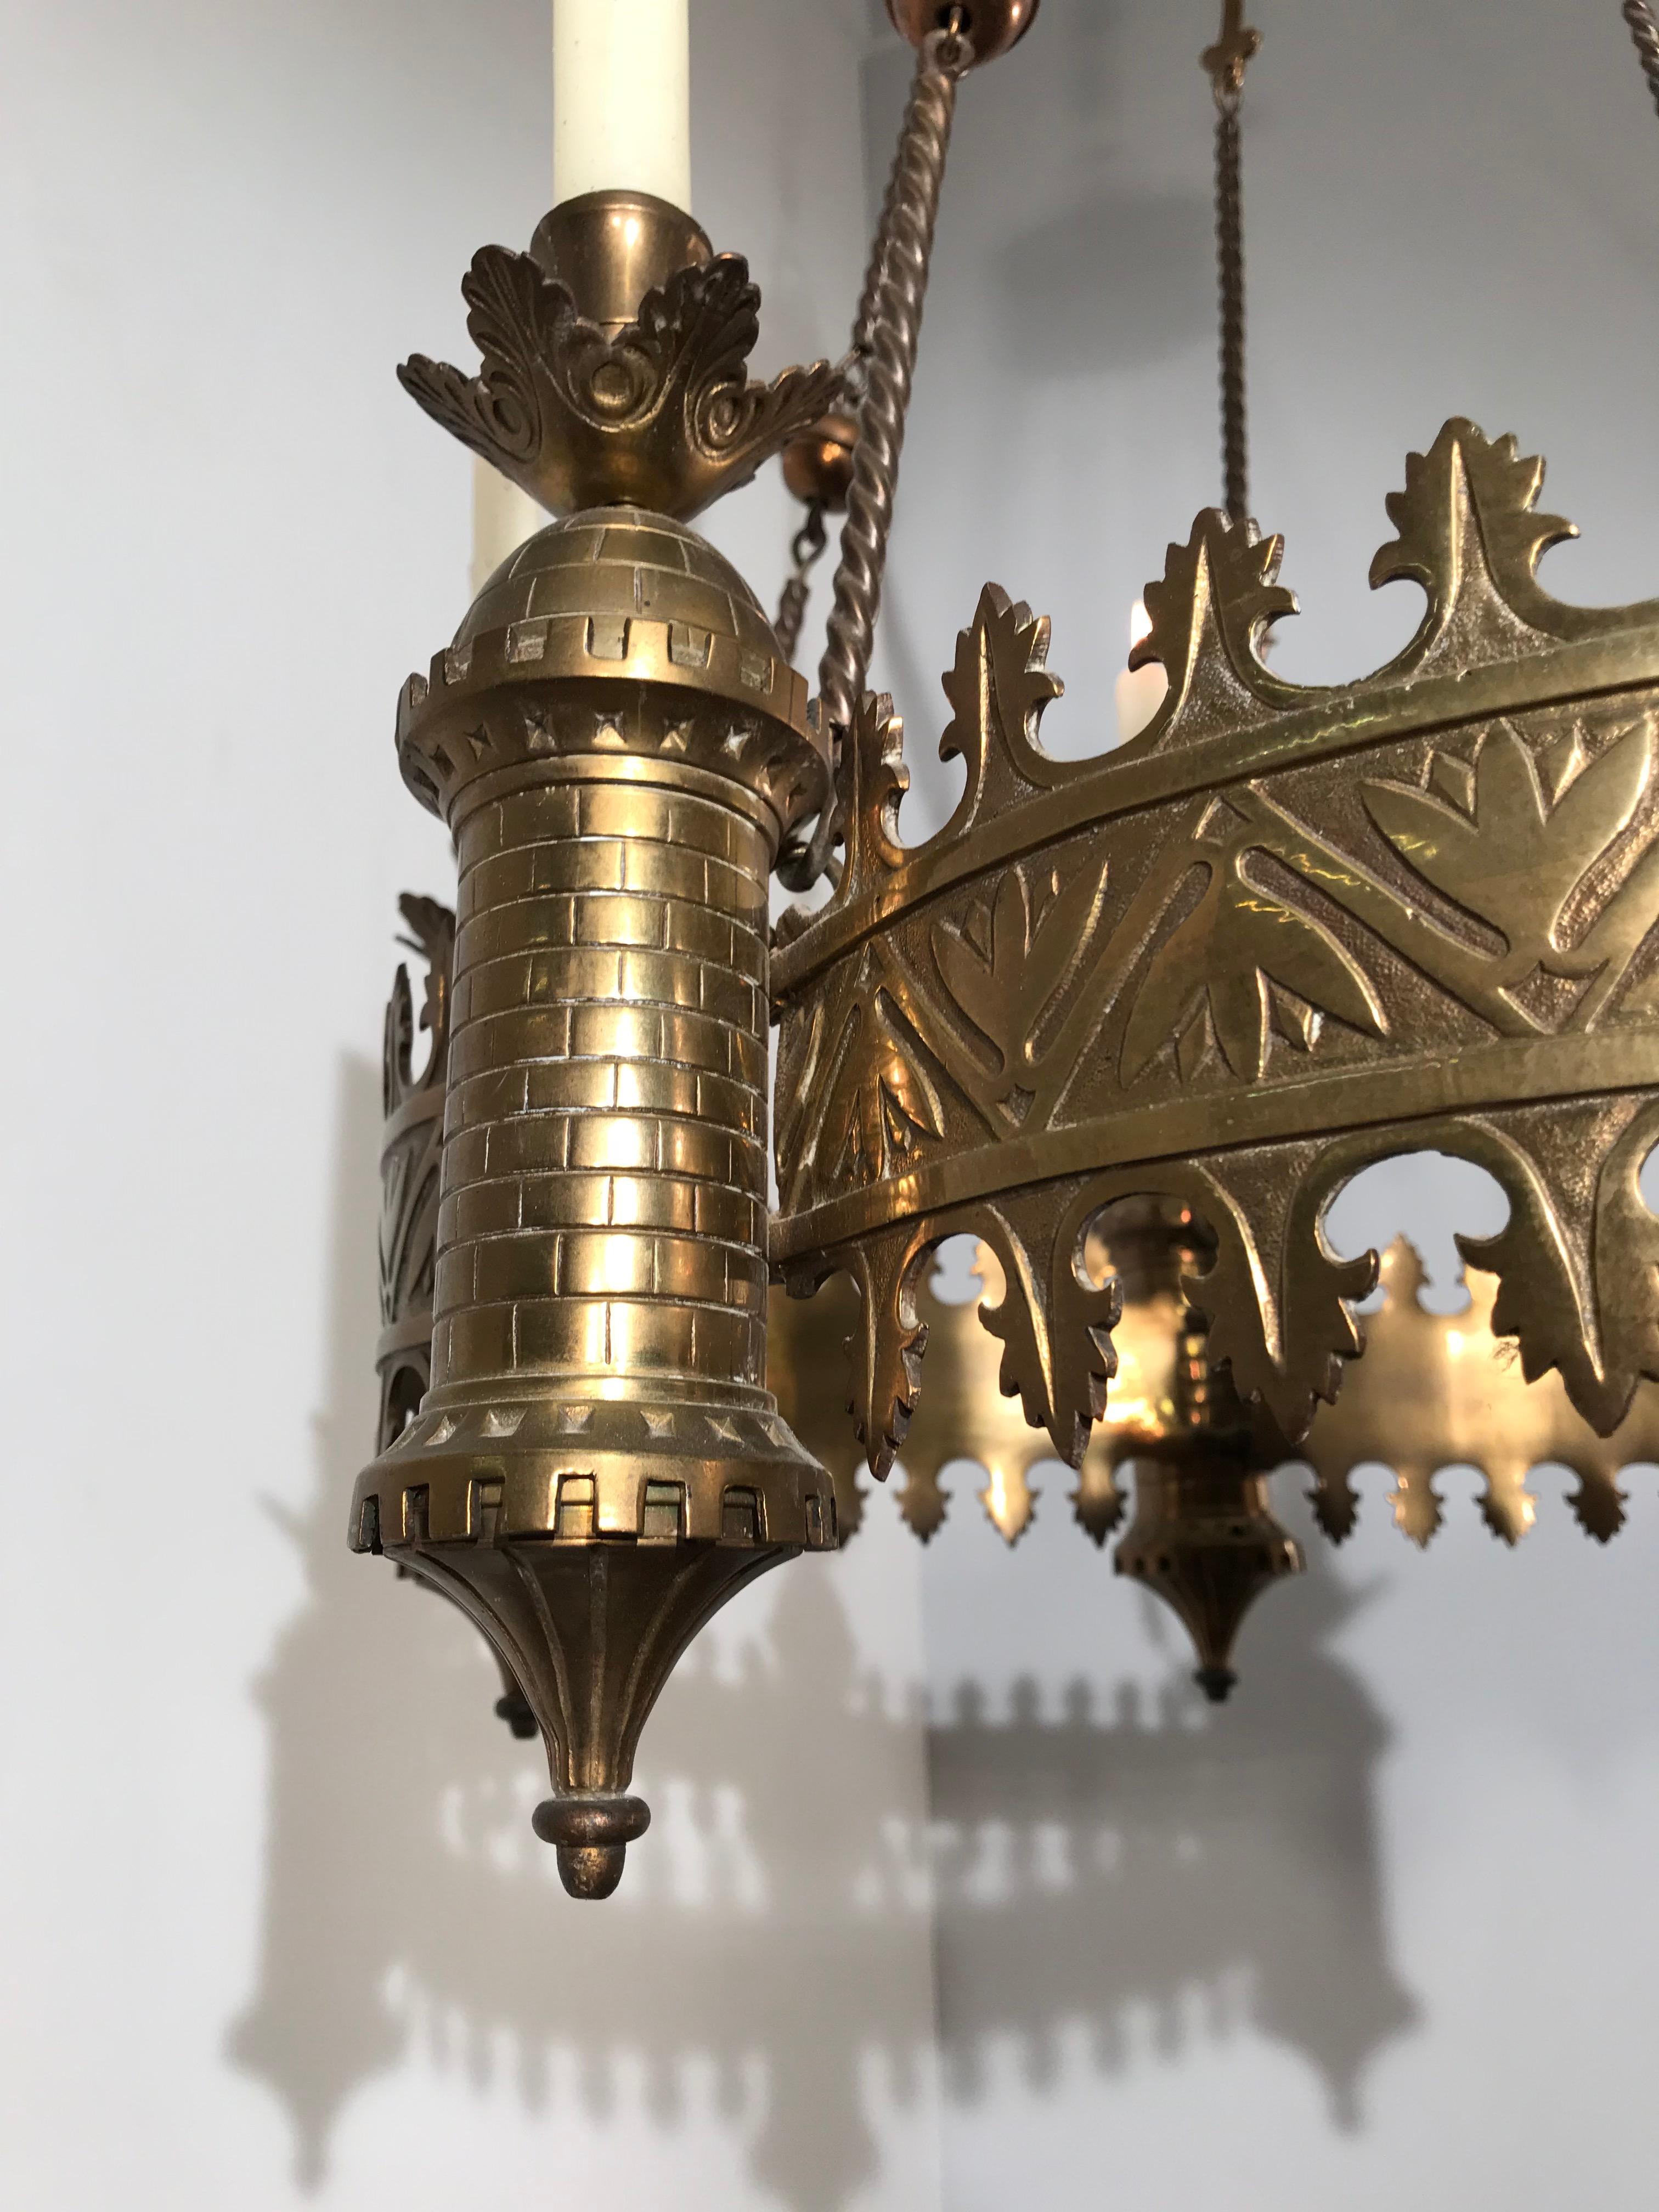 19th Century Antique Bronze and Brass Castle Tower Design Gothic Revival Candle Chandelier